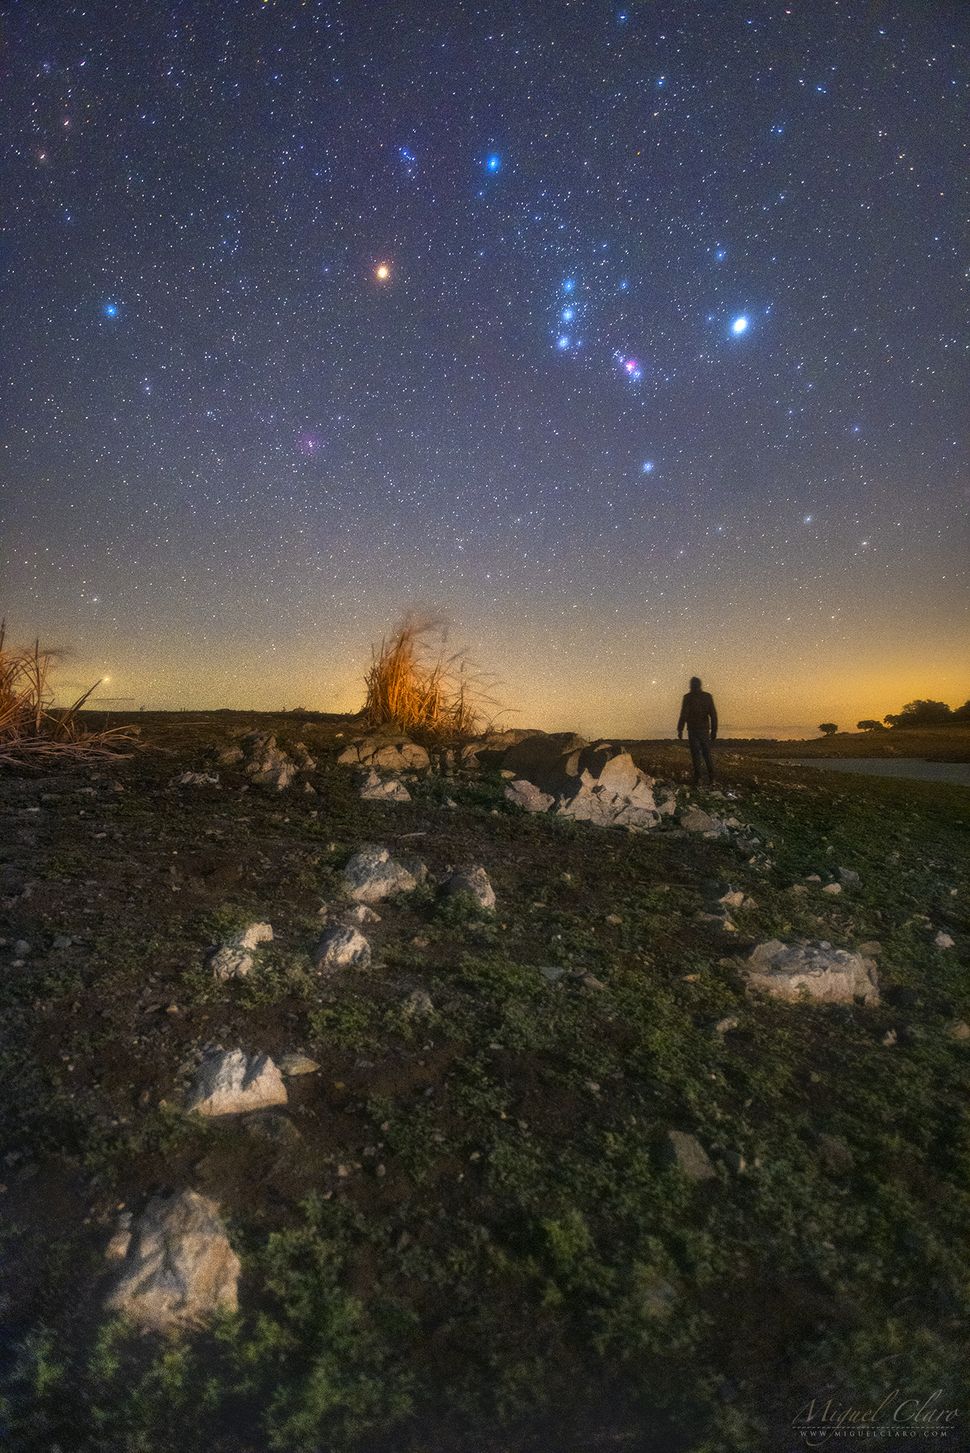 Orion and its dimming star Betelgeuse shine over a stargazer in this sentimental night-sky photo